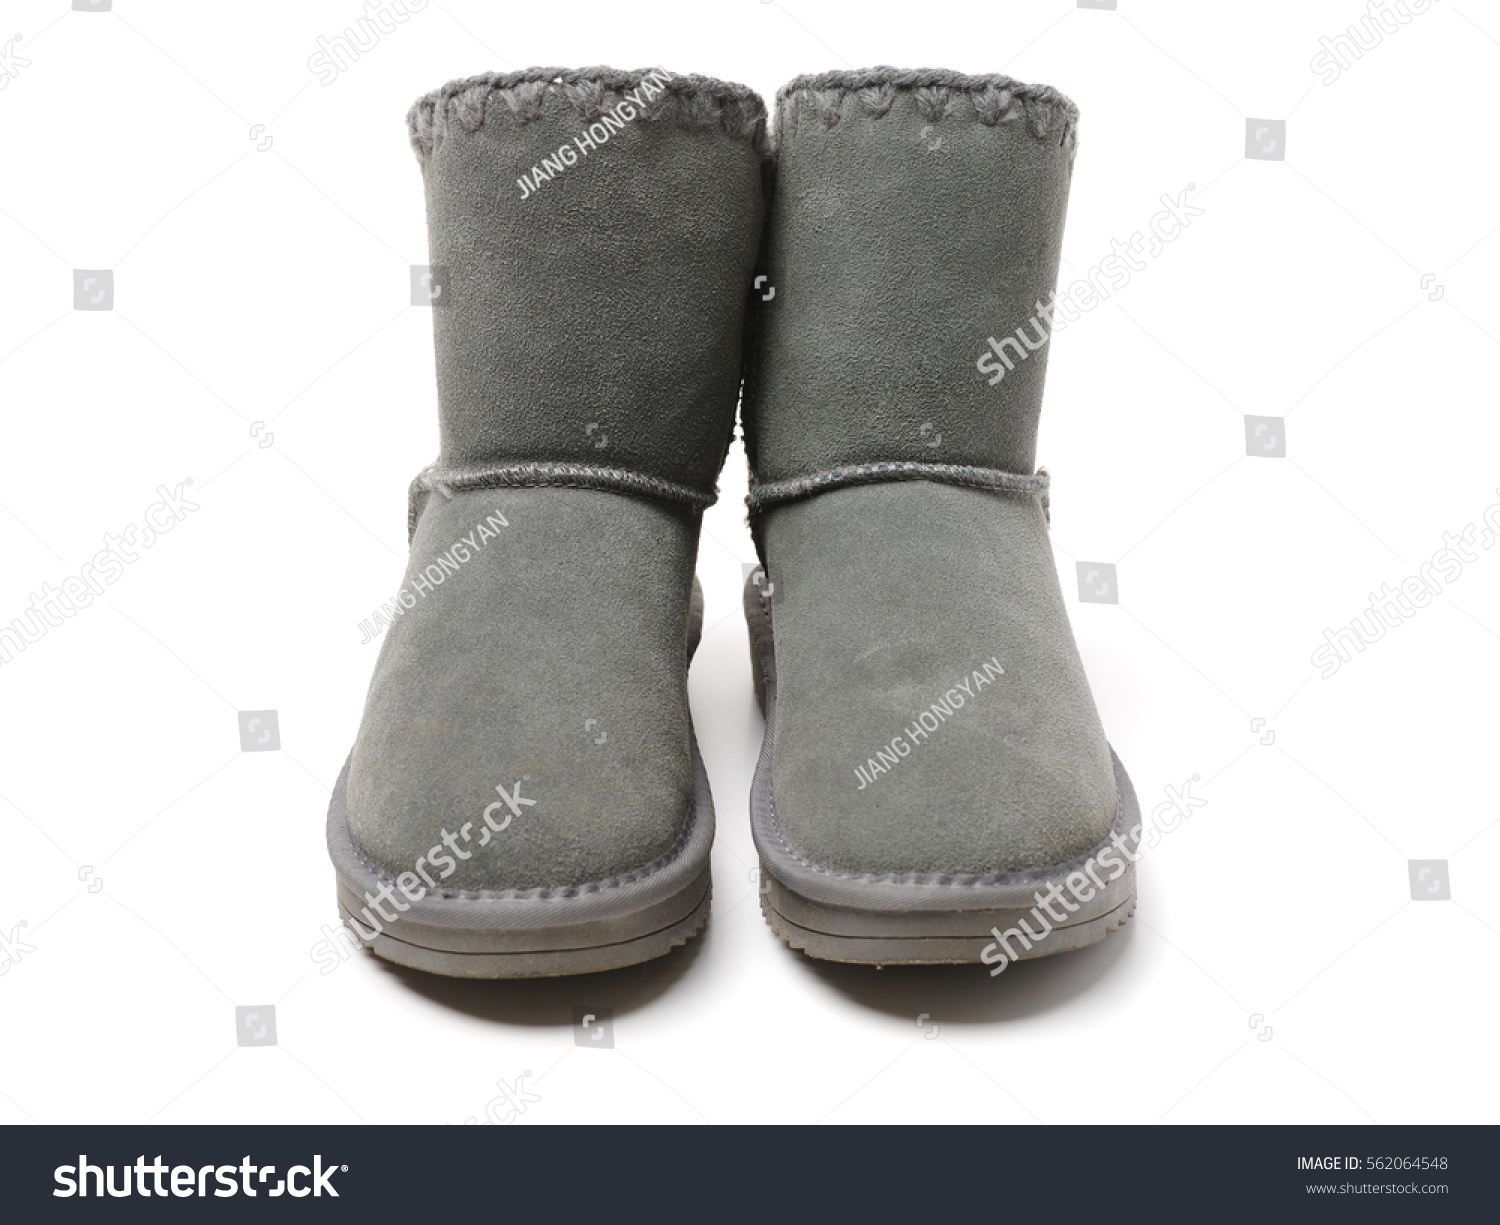 grunge style boots